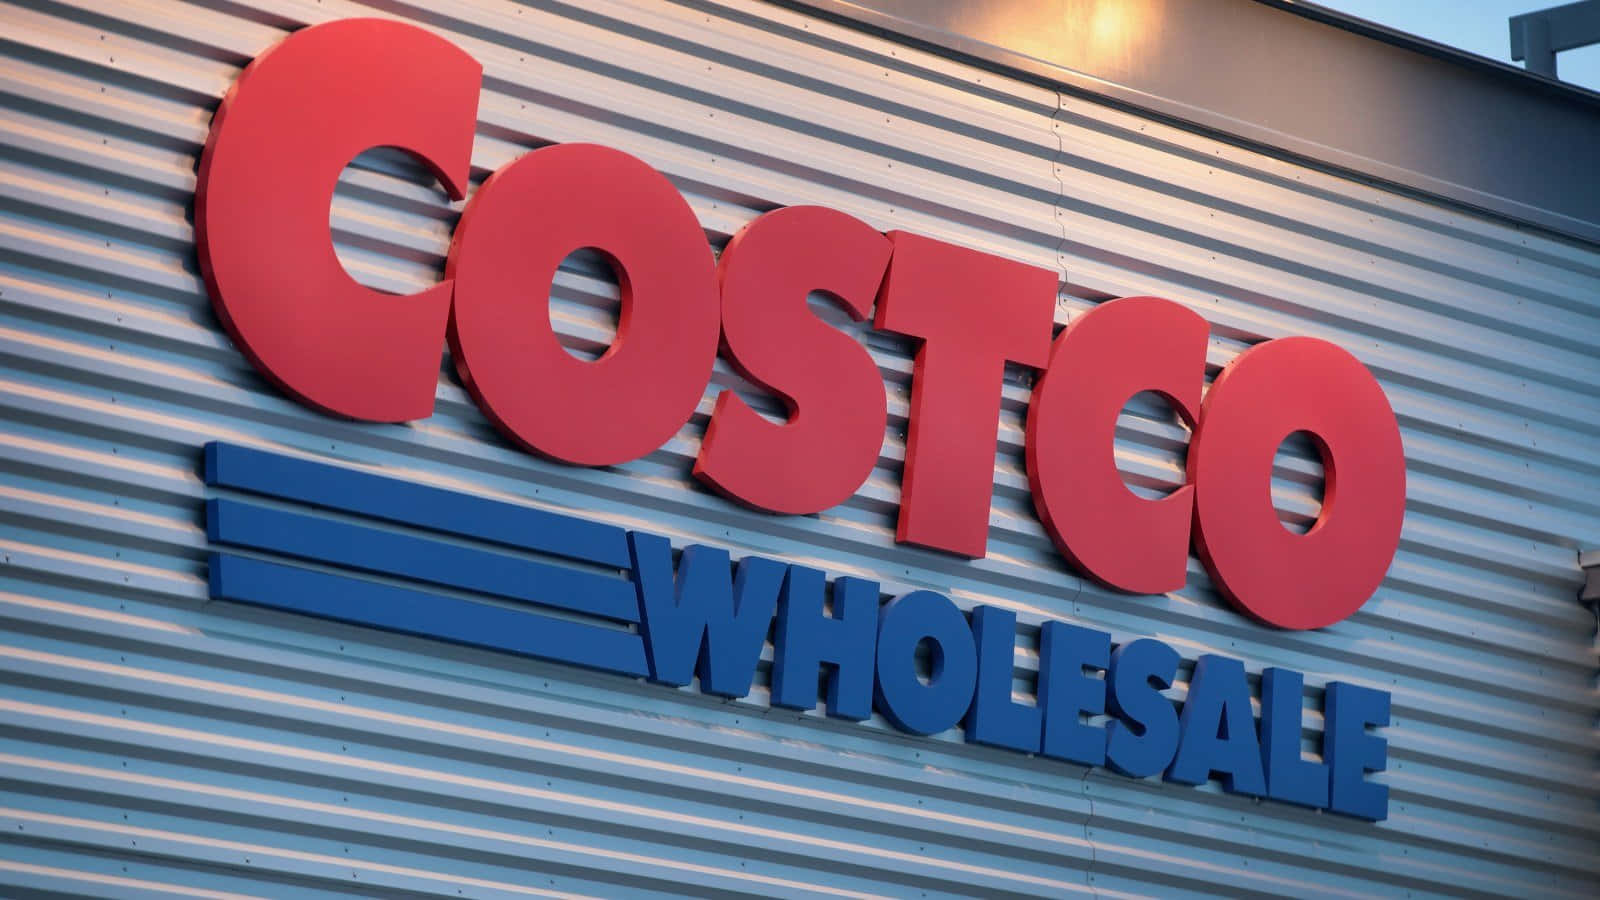 Discover your favorite products at Costco